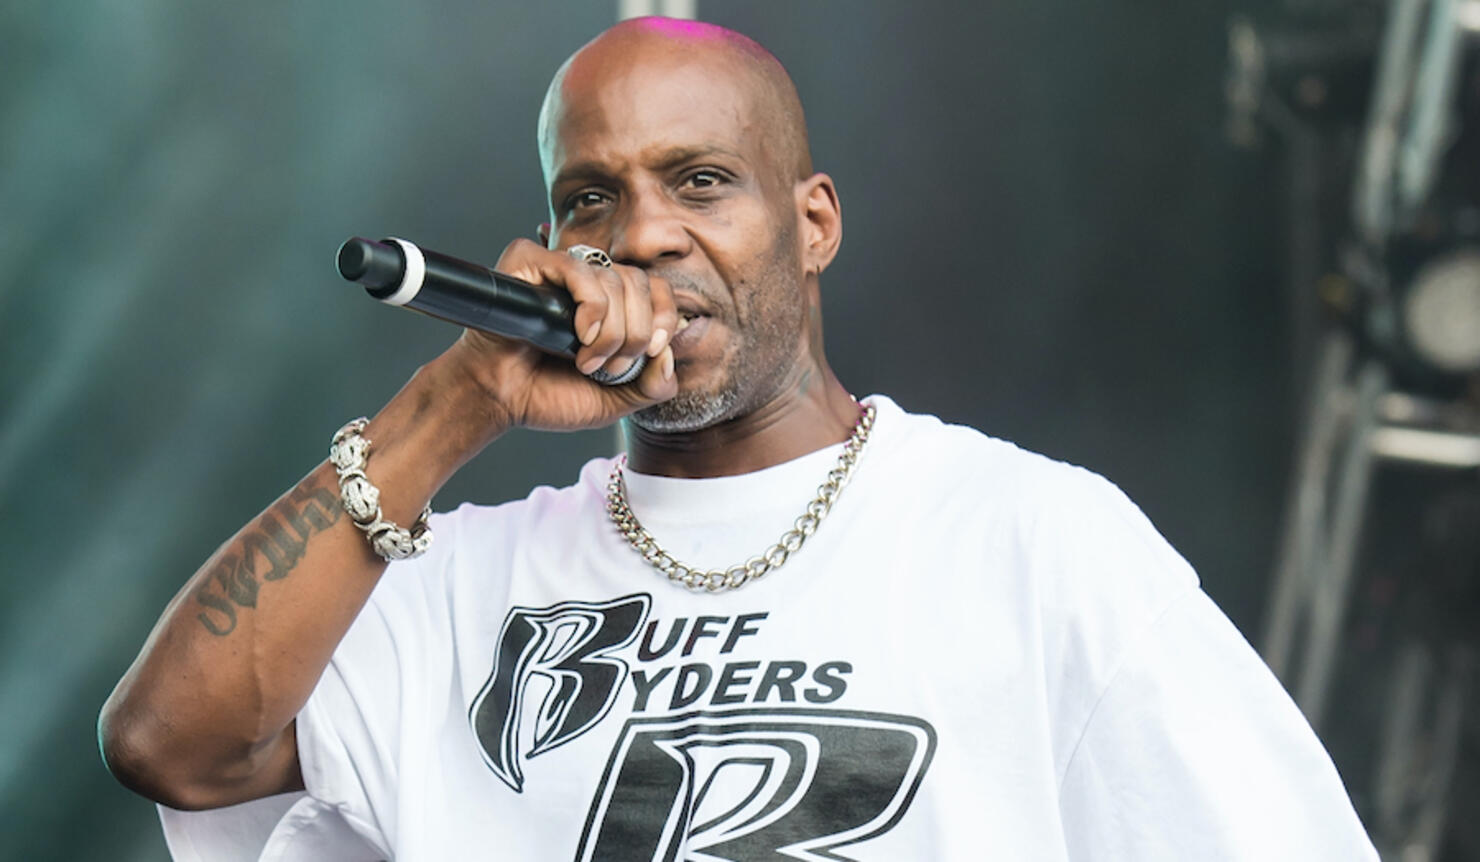 DMX to be Honoured With Memorial in His Hometown